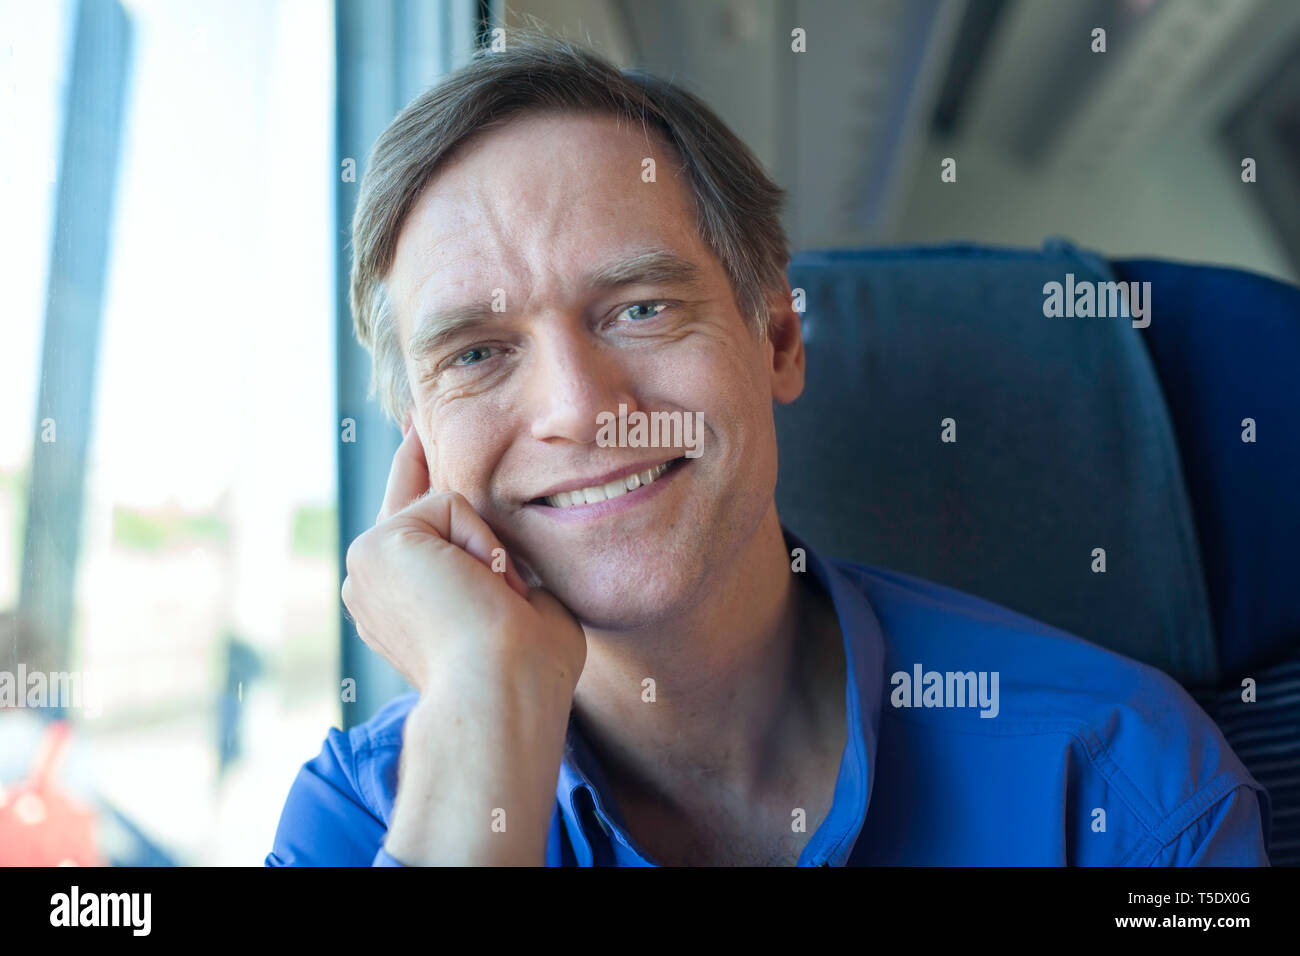 handsome Caucasian man in blue shirt sitting on commuter train in daytime, smiling at camera Stock Photo